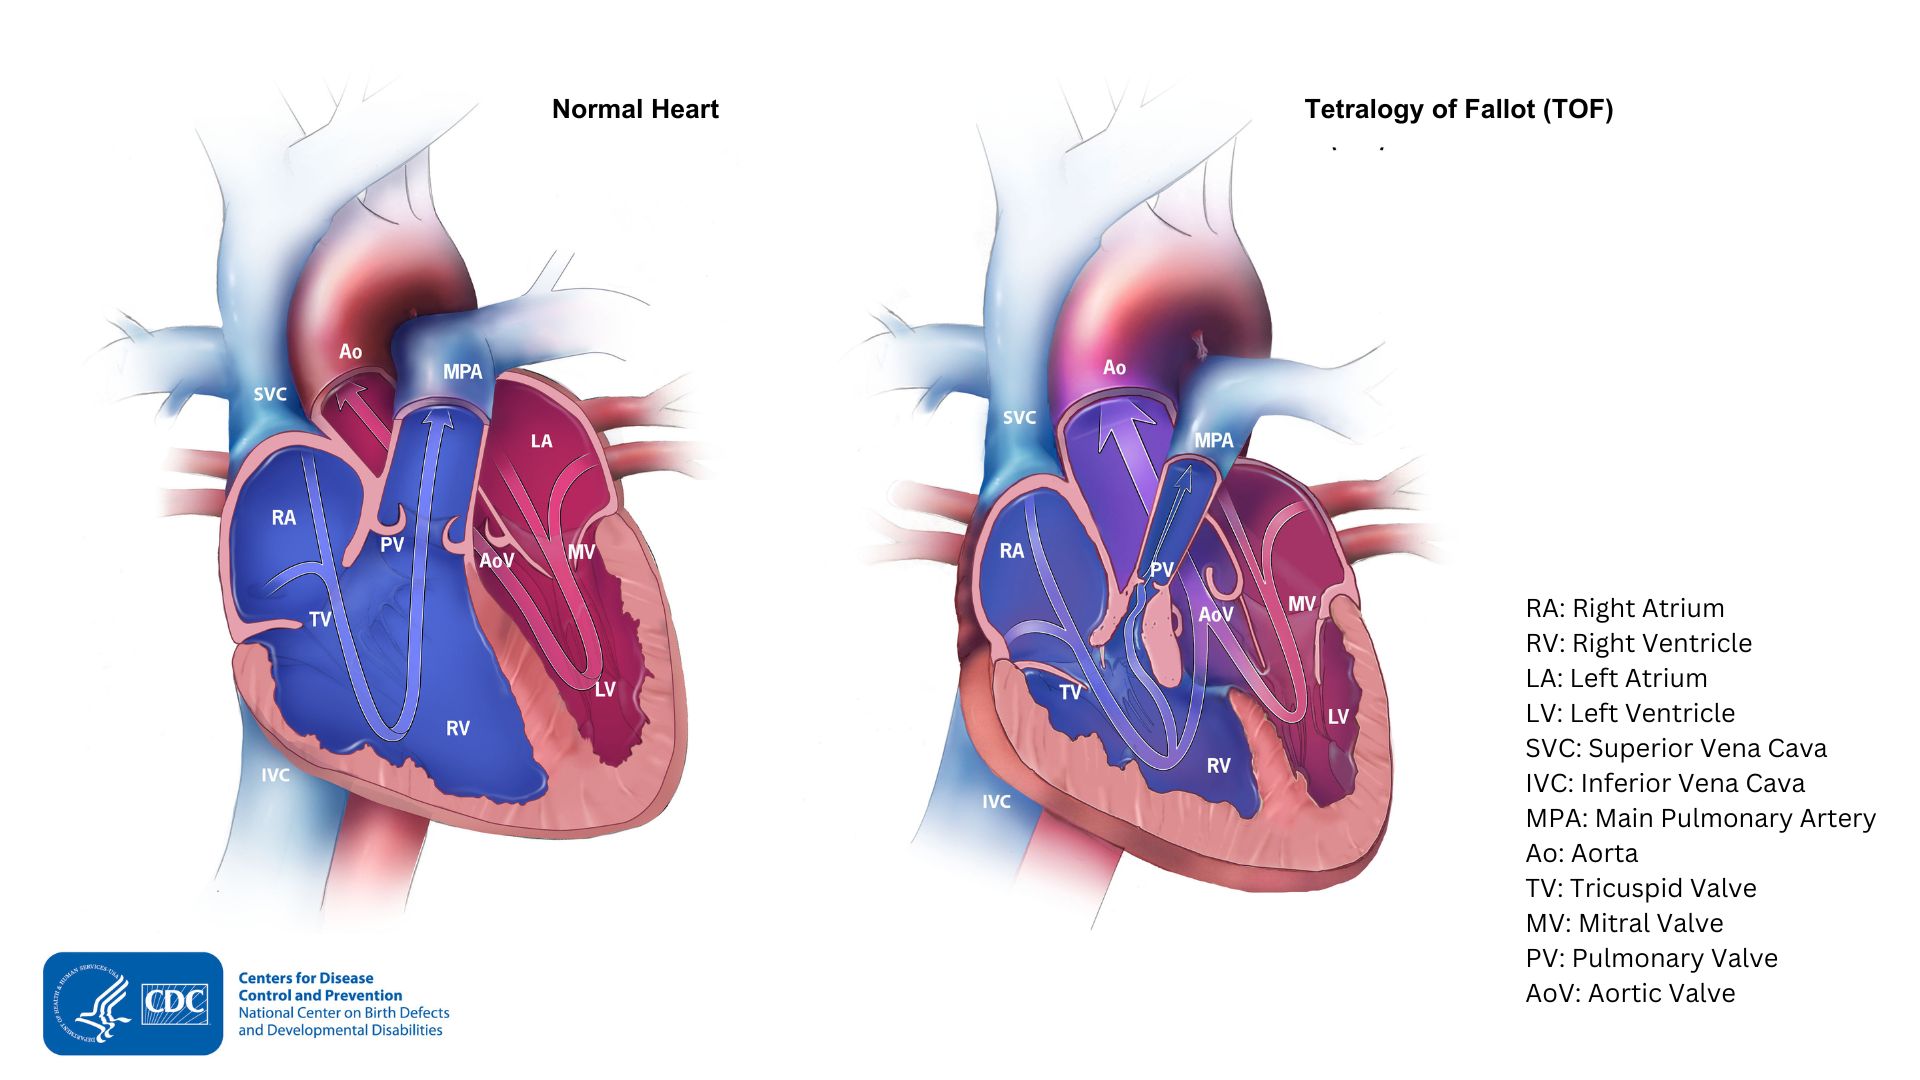 A typical heart compared with Tetralogy of Fallot